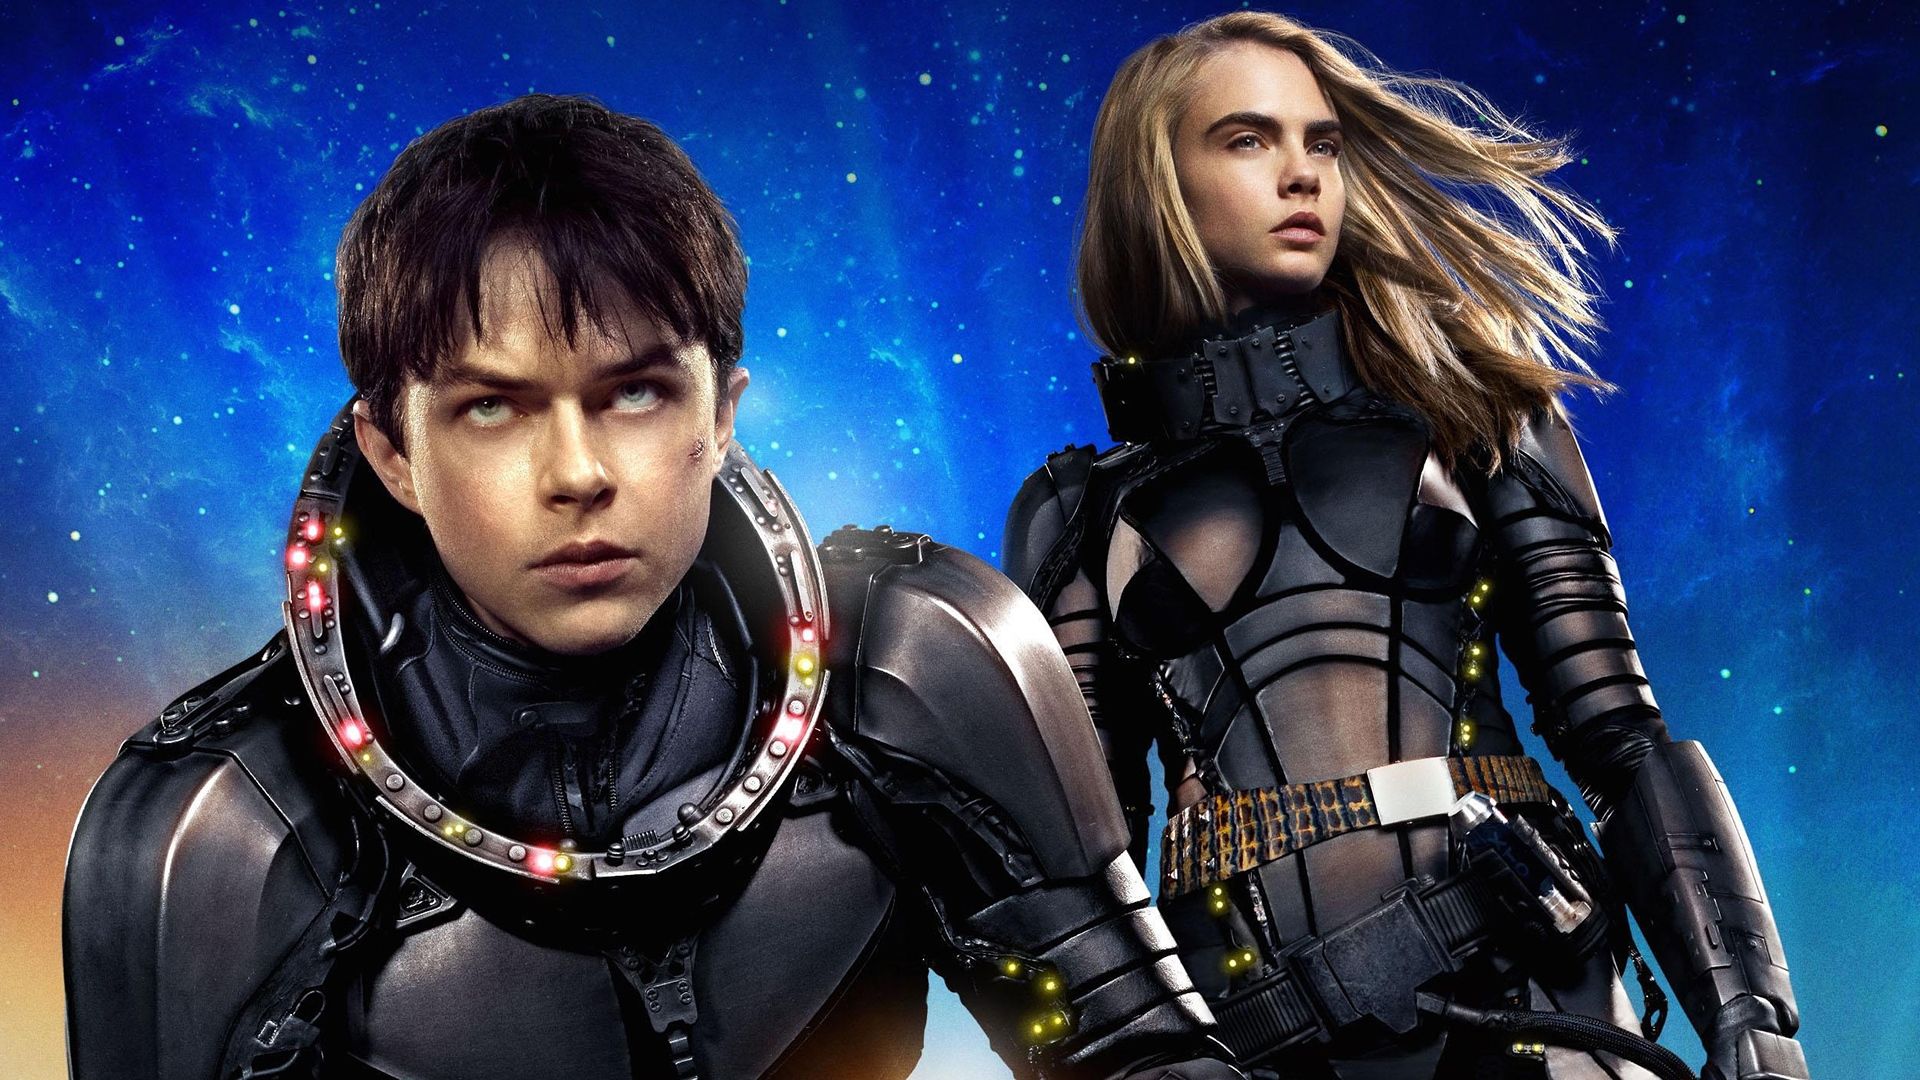 Wallpaper, movies, Cara Delevingne, Valerian and the City of a Thousand Planets 1920x1080